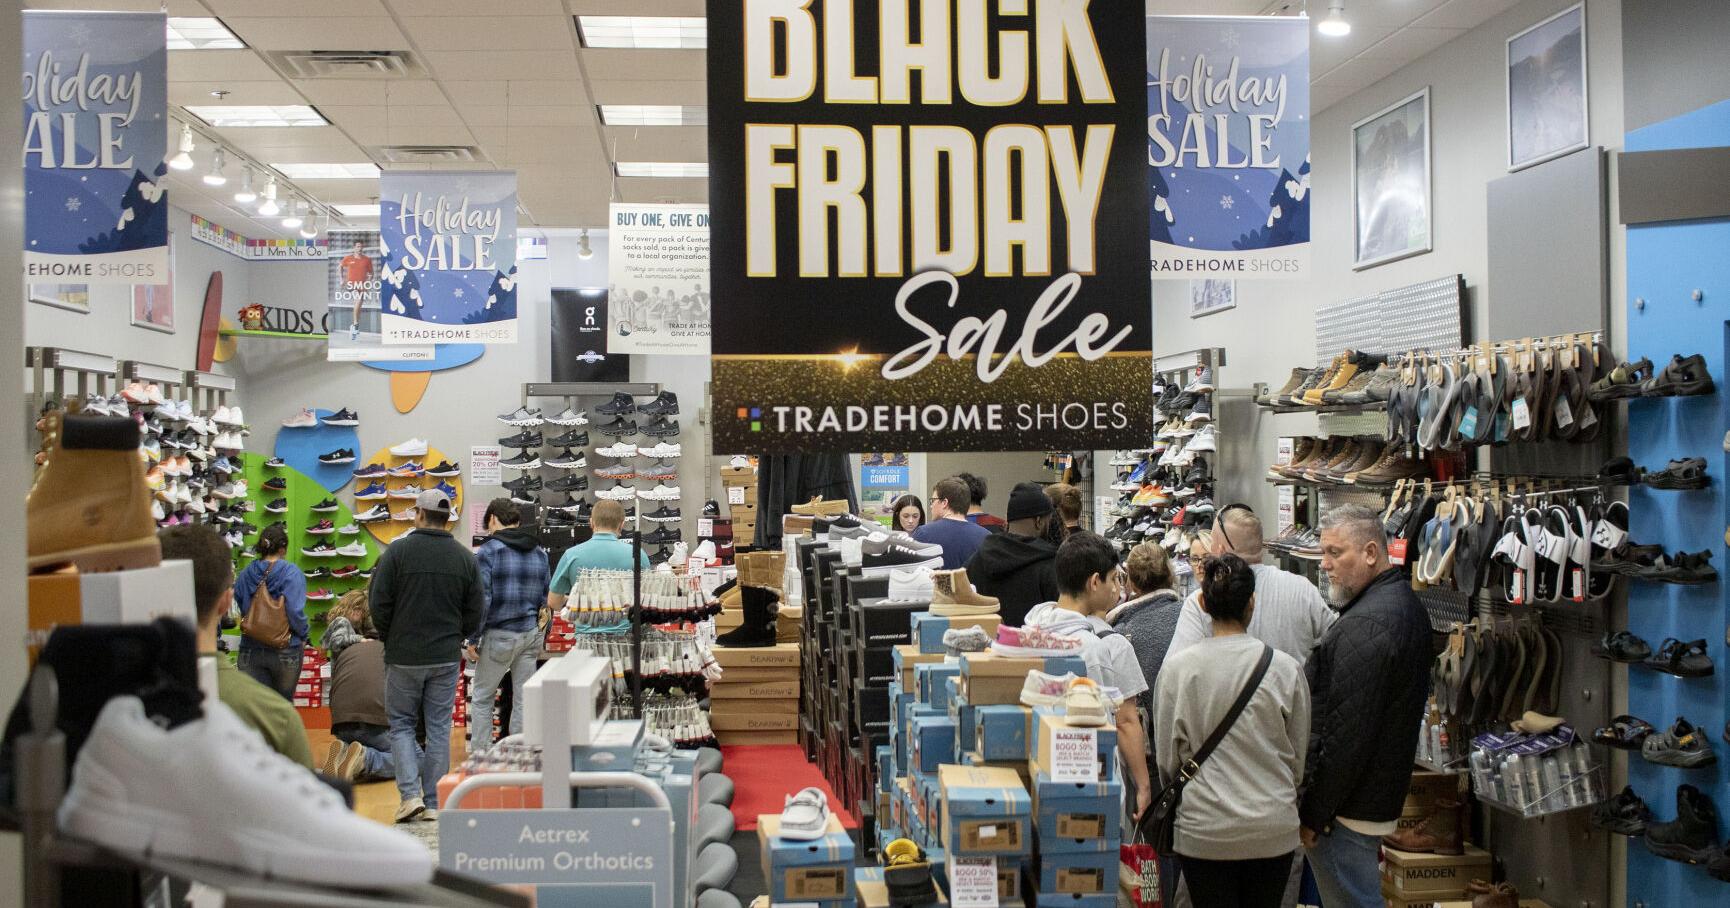 Customers take on Black Friday in Tyler for annual shopping event